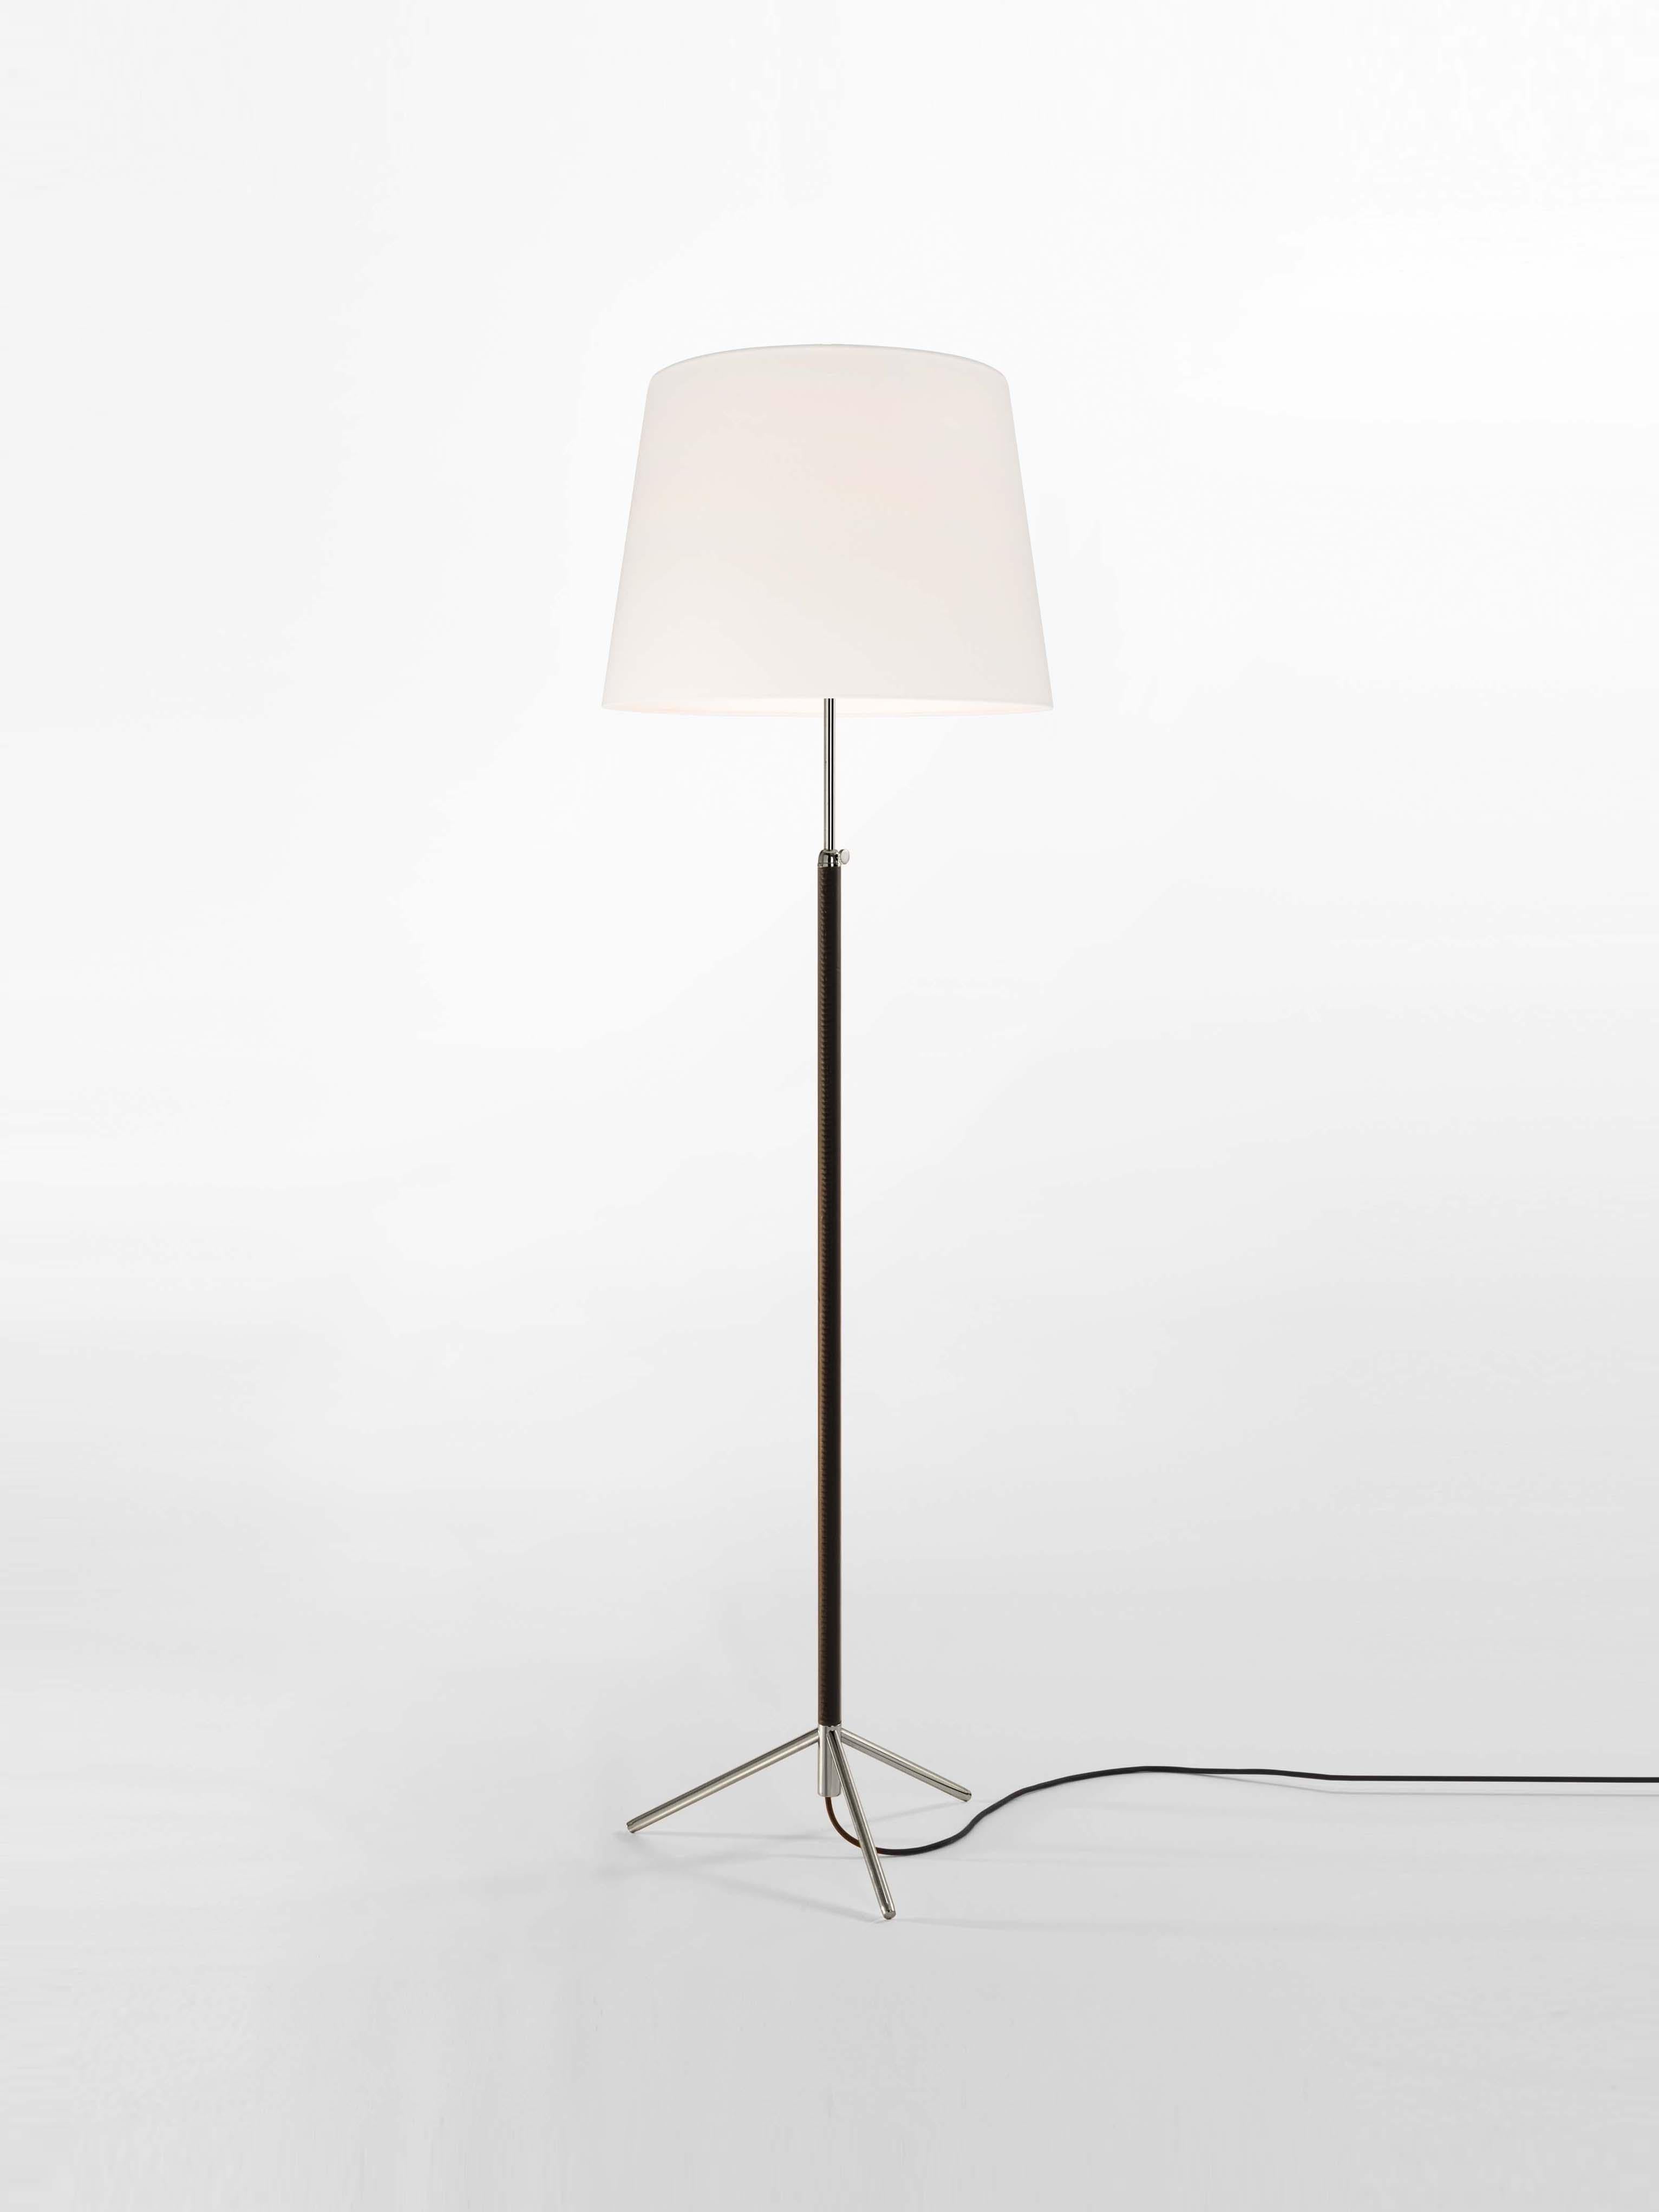 White and chrome pie de Salón G1 floor lamp by Jaume Sans
Dimensions: D 45 x H 120-160 cm
Materials: Metal, leather, linen.
Available in chrome-plated or polished brass structure.
Available in other shade colors and sizes.

This slender